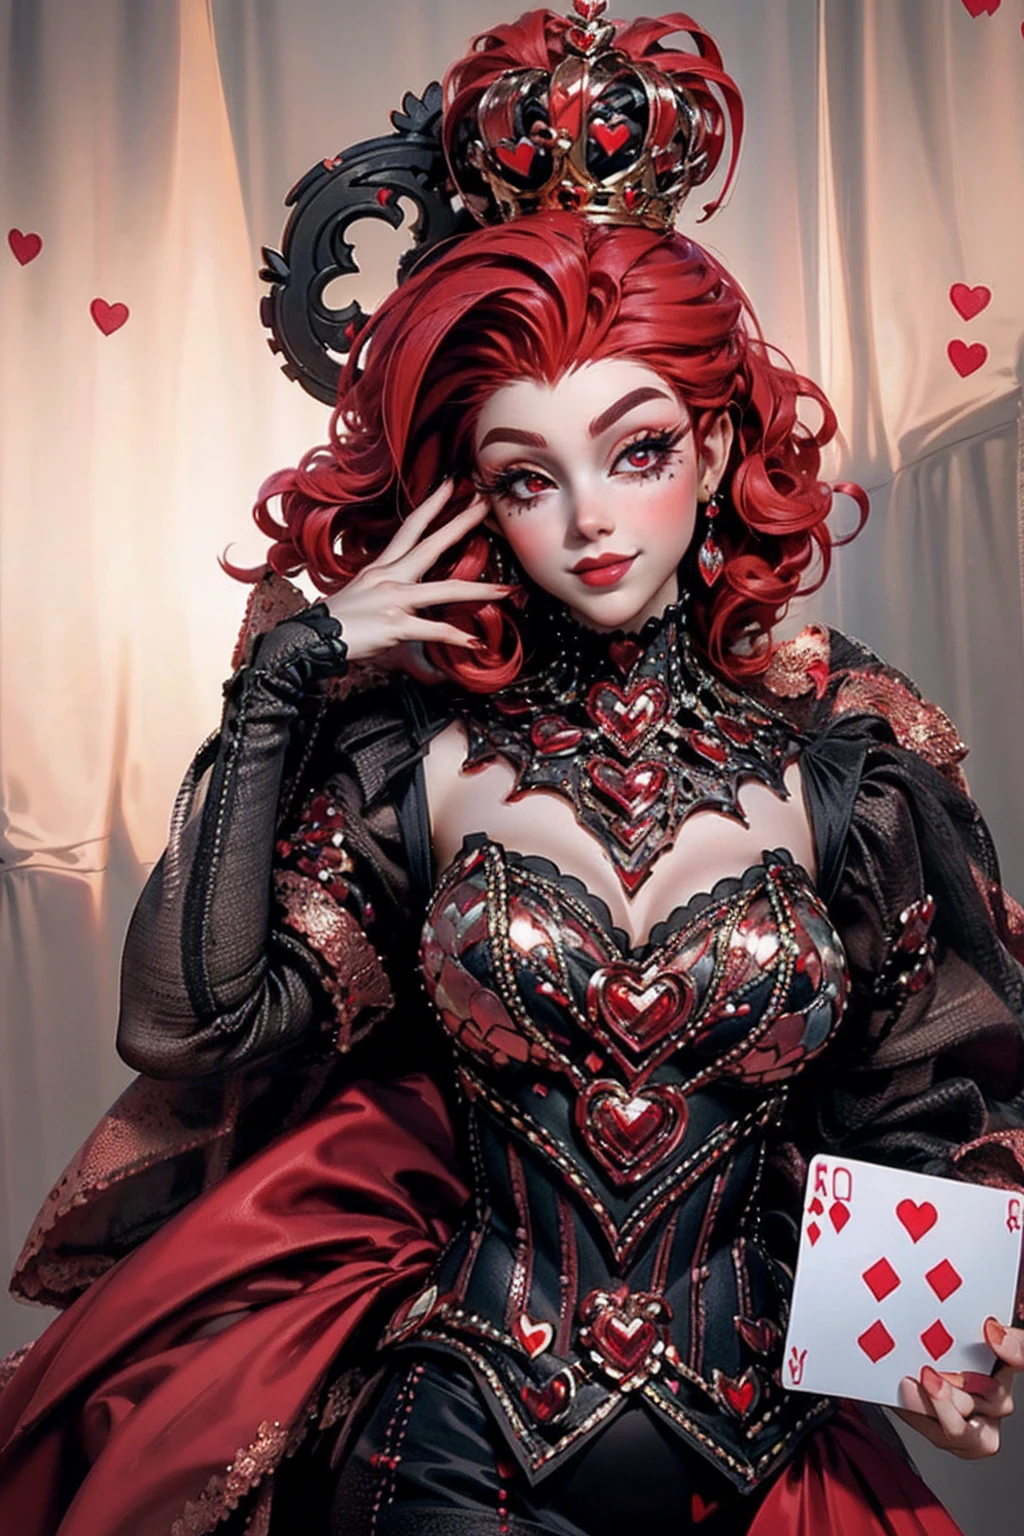 { - anatomy error}(Masterpiece - Ultra-detailed, very high resolution) Em um luxuoso cassino, A stunning woman wears an exquisite dress adorned with heart symbols, embodying the royal presence of the Queen of Hearts. Surrounded by a backdrop of poker cards and chips, She exudes confidence and seduction, convidando os jogadores a testar sua sorte e habilidades no jogo de azar. short curly hair, cabelos vermelhos (red hair ) (queen of hearts), sorrindo, sorriso largo, upper body